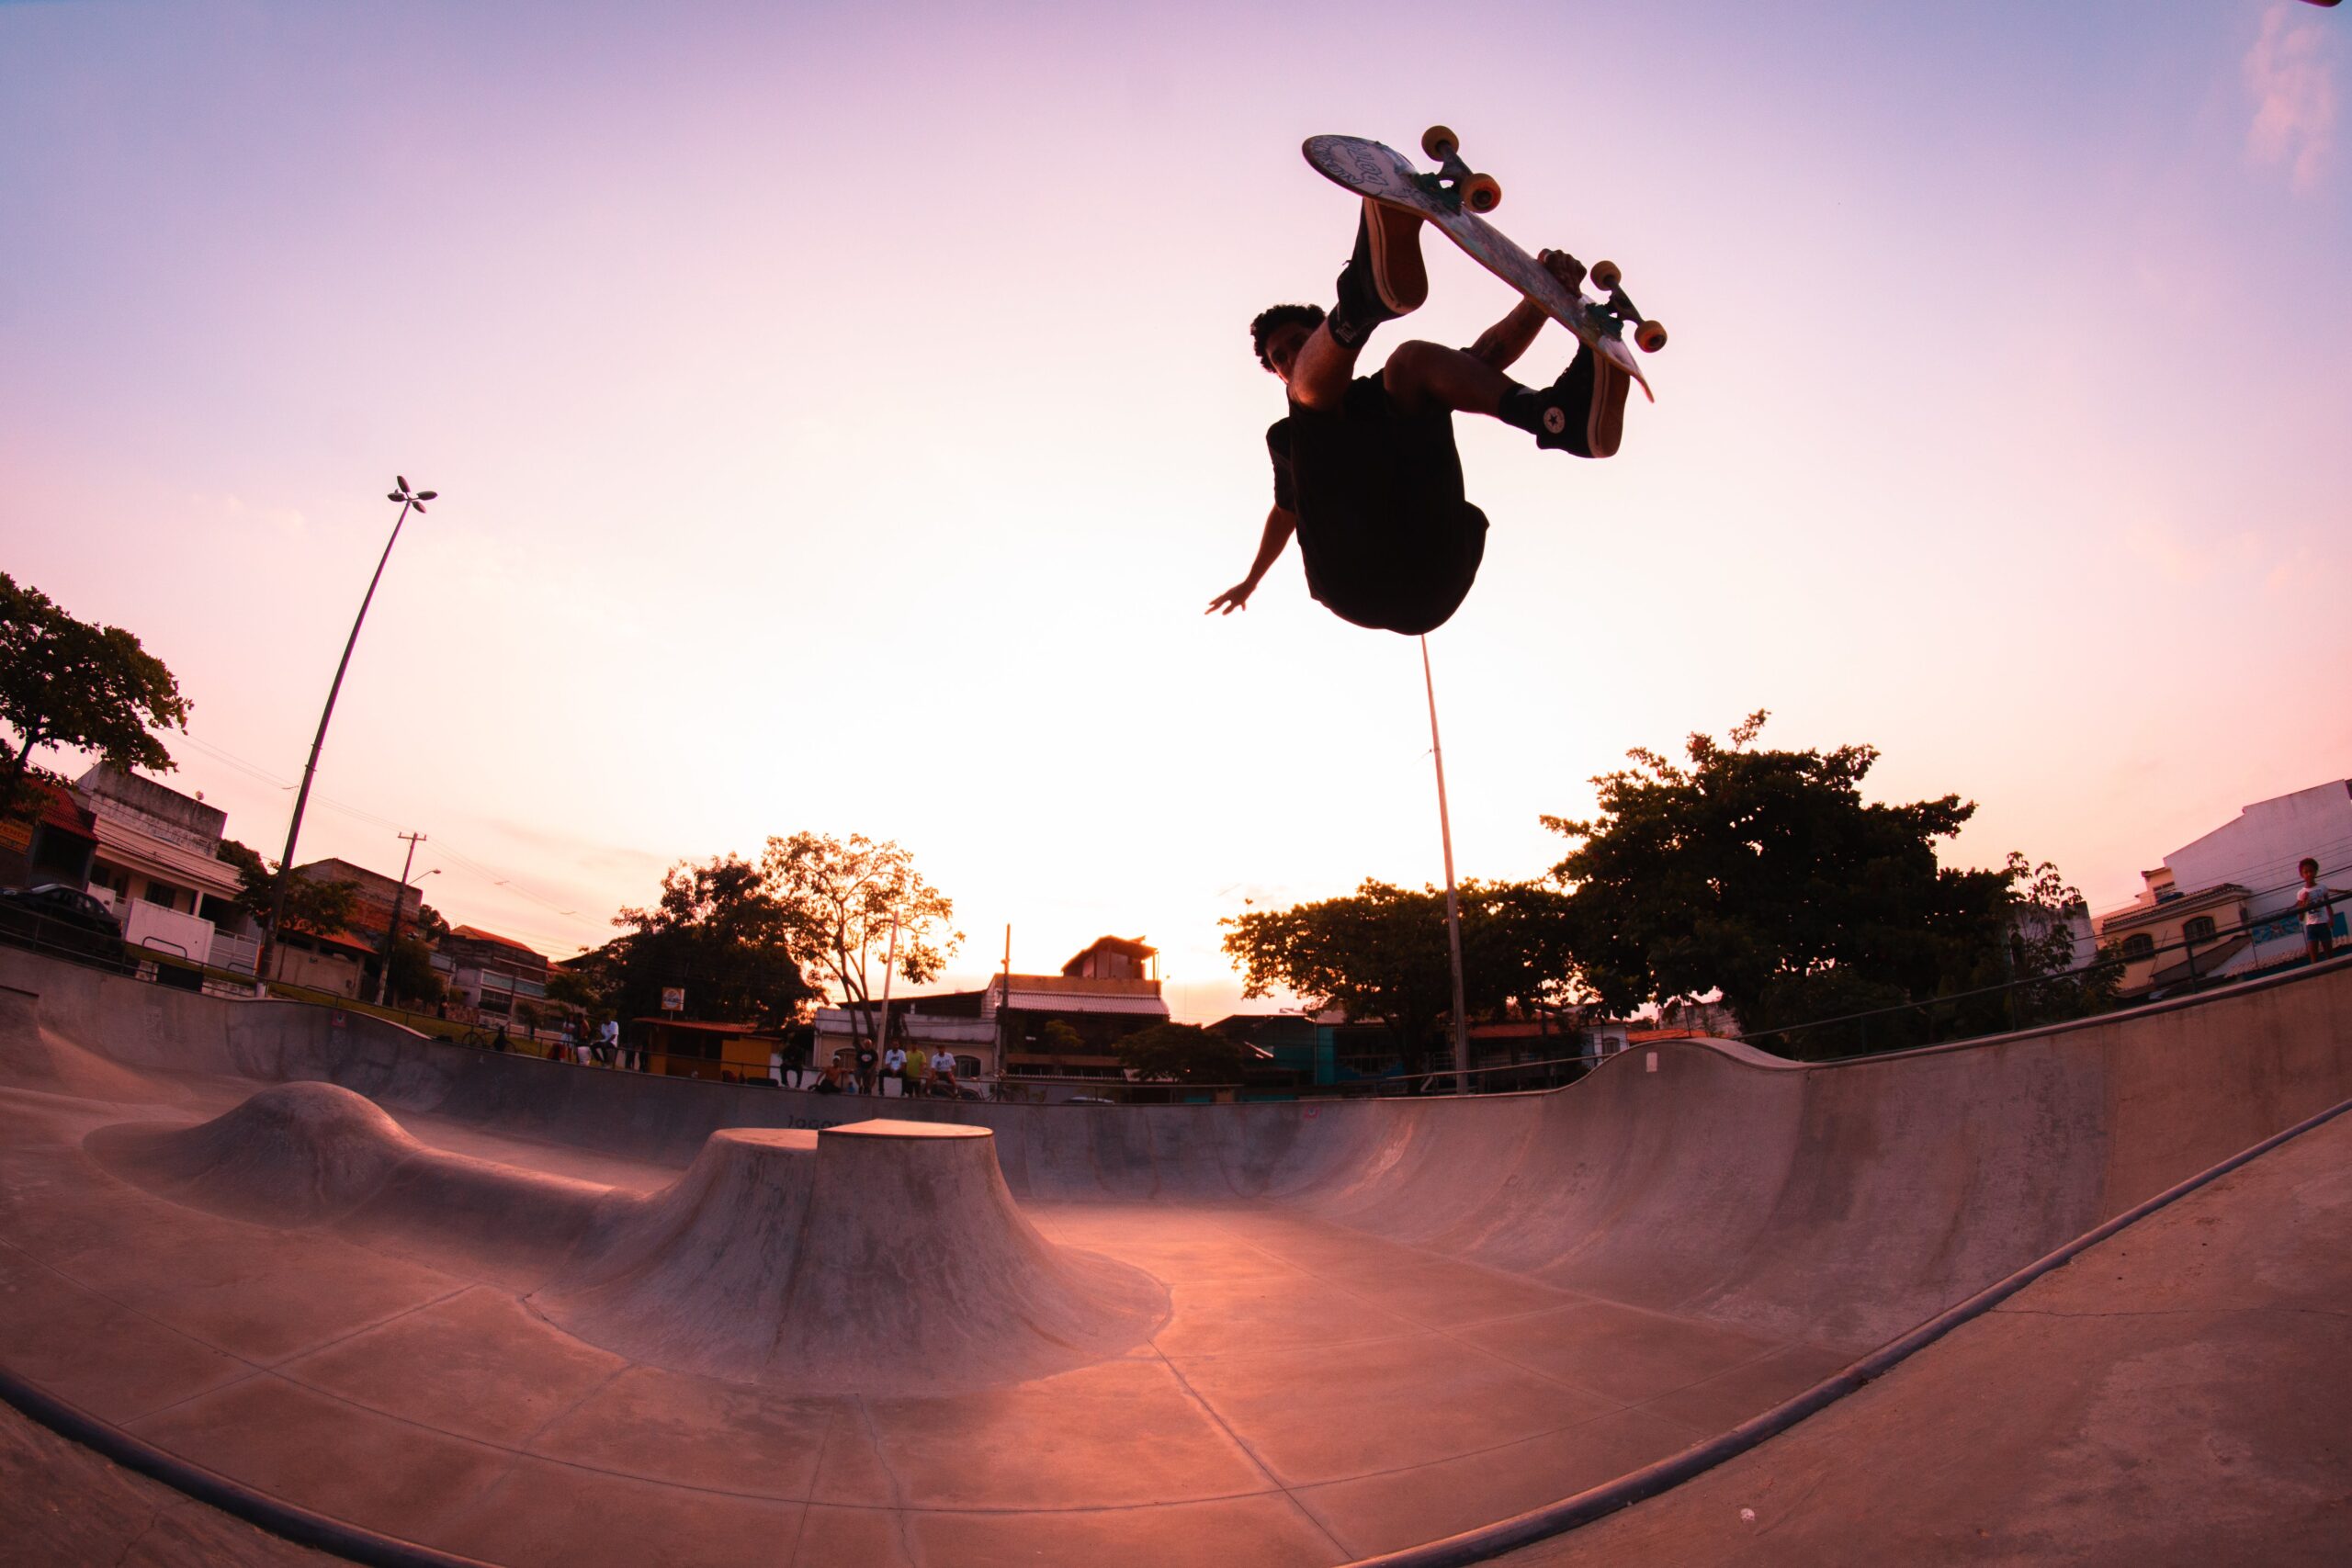 What Are The Key Steps To Learn Skateboard 360 Shuvits?